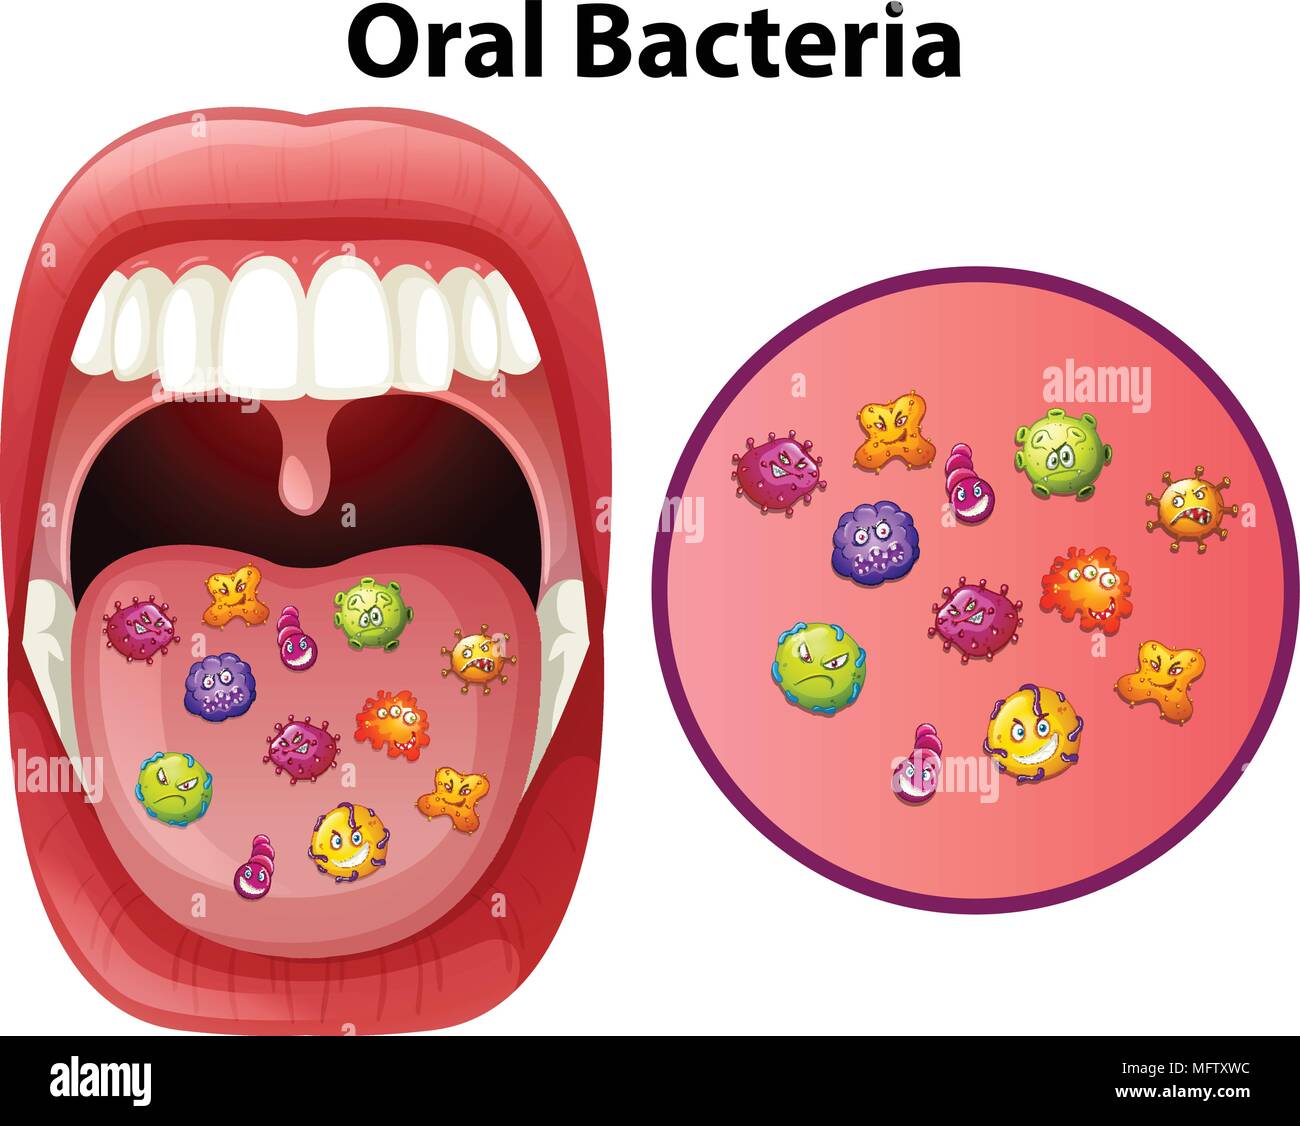 An Image Showing Oral Bacteria illustration Stock Vector